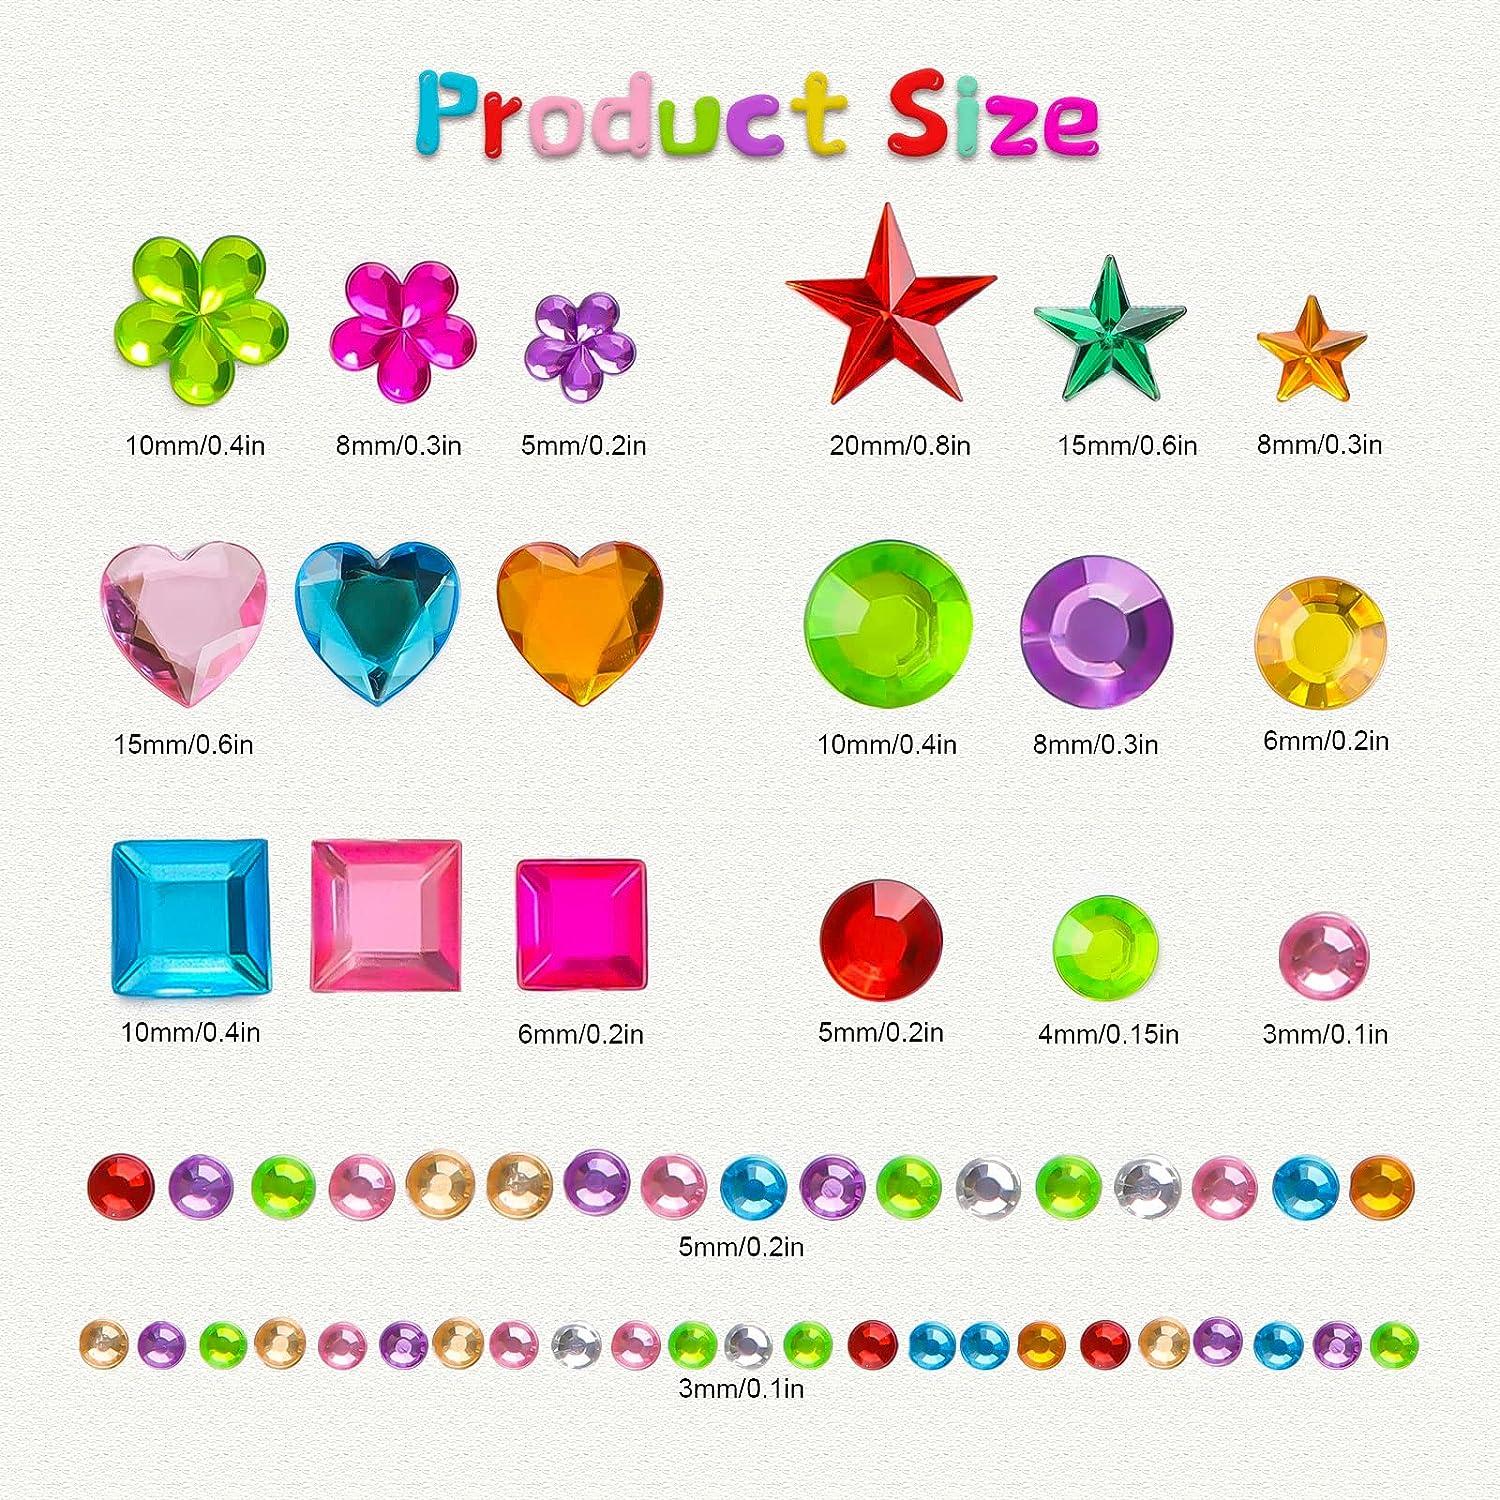 Gem Stickers, 1510pcs Rhinestone Stickers, Self Adhesive Jewel Stickers,  Bling Gems for Crafts, Stick on Gems for Makeup, DIY, Eye, Nail, Assorted